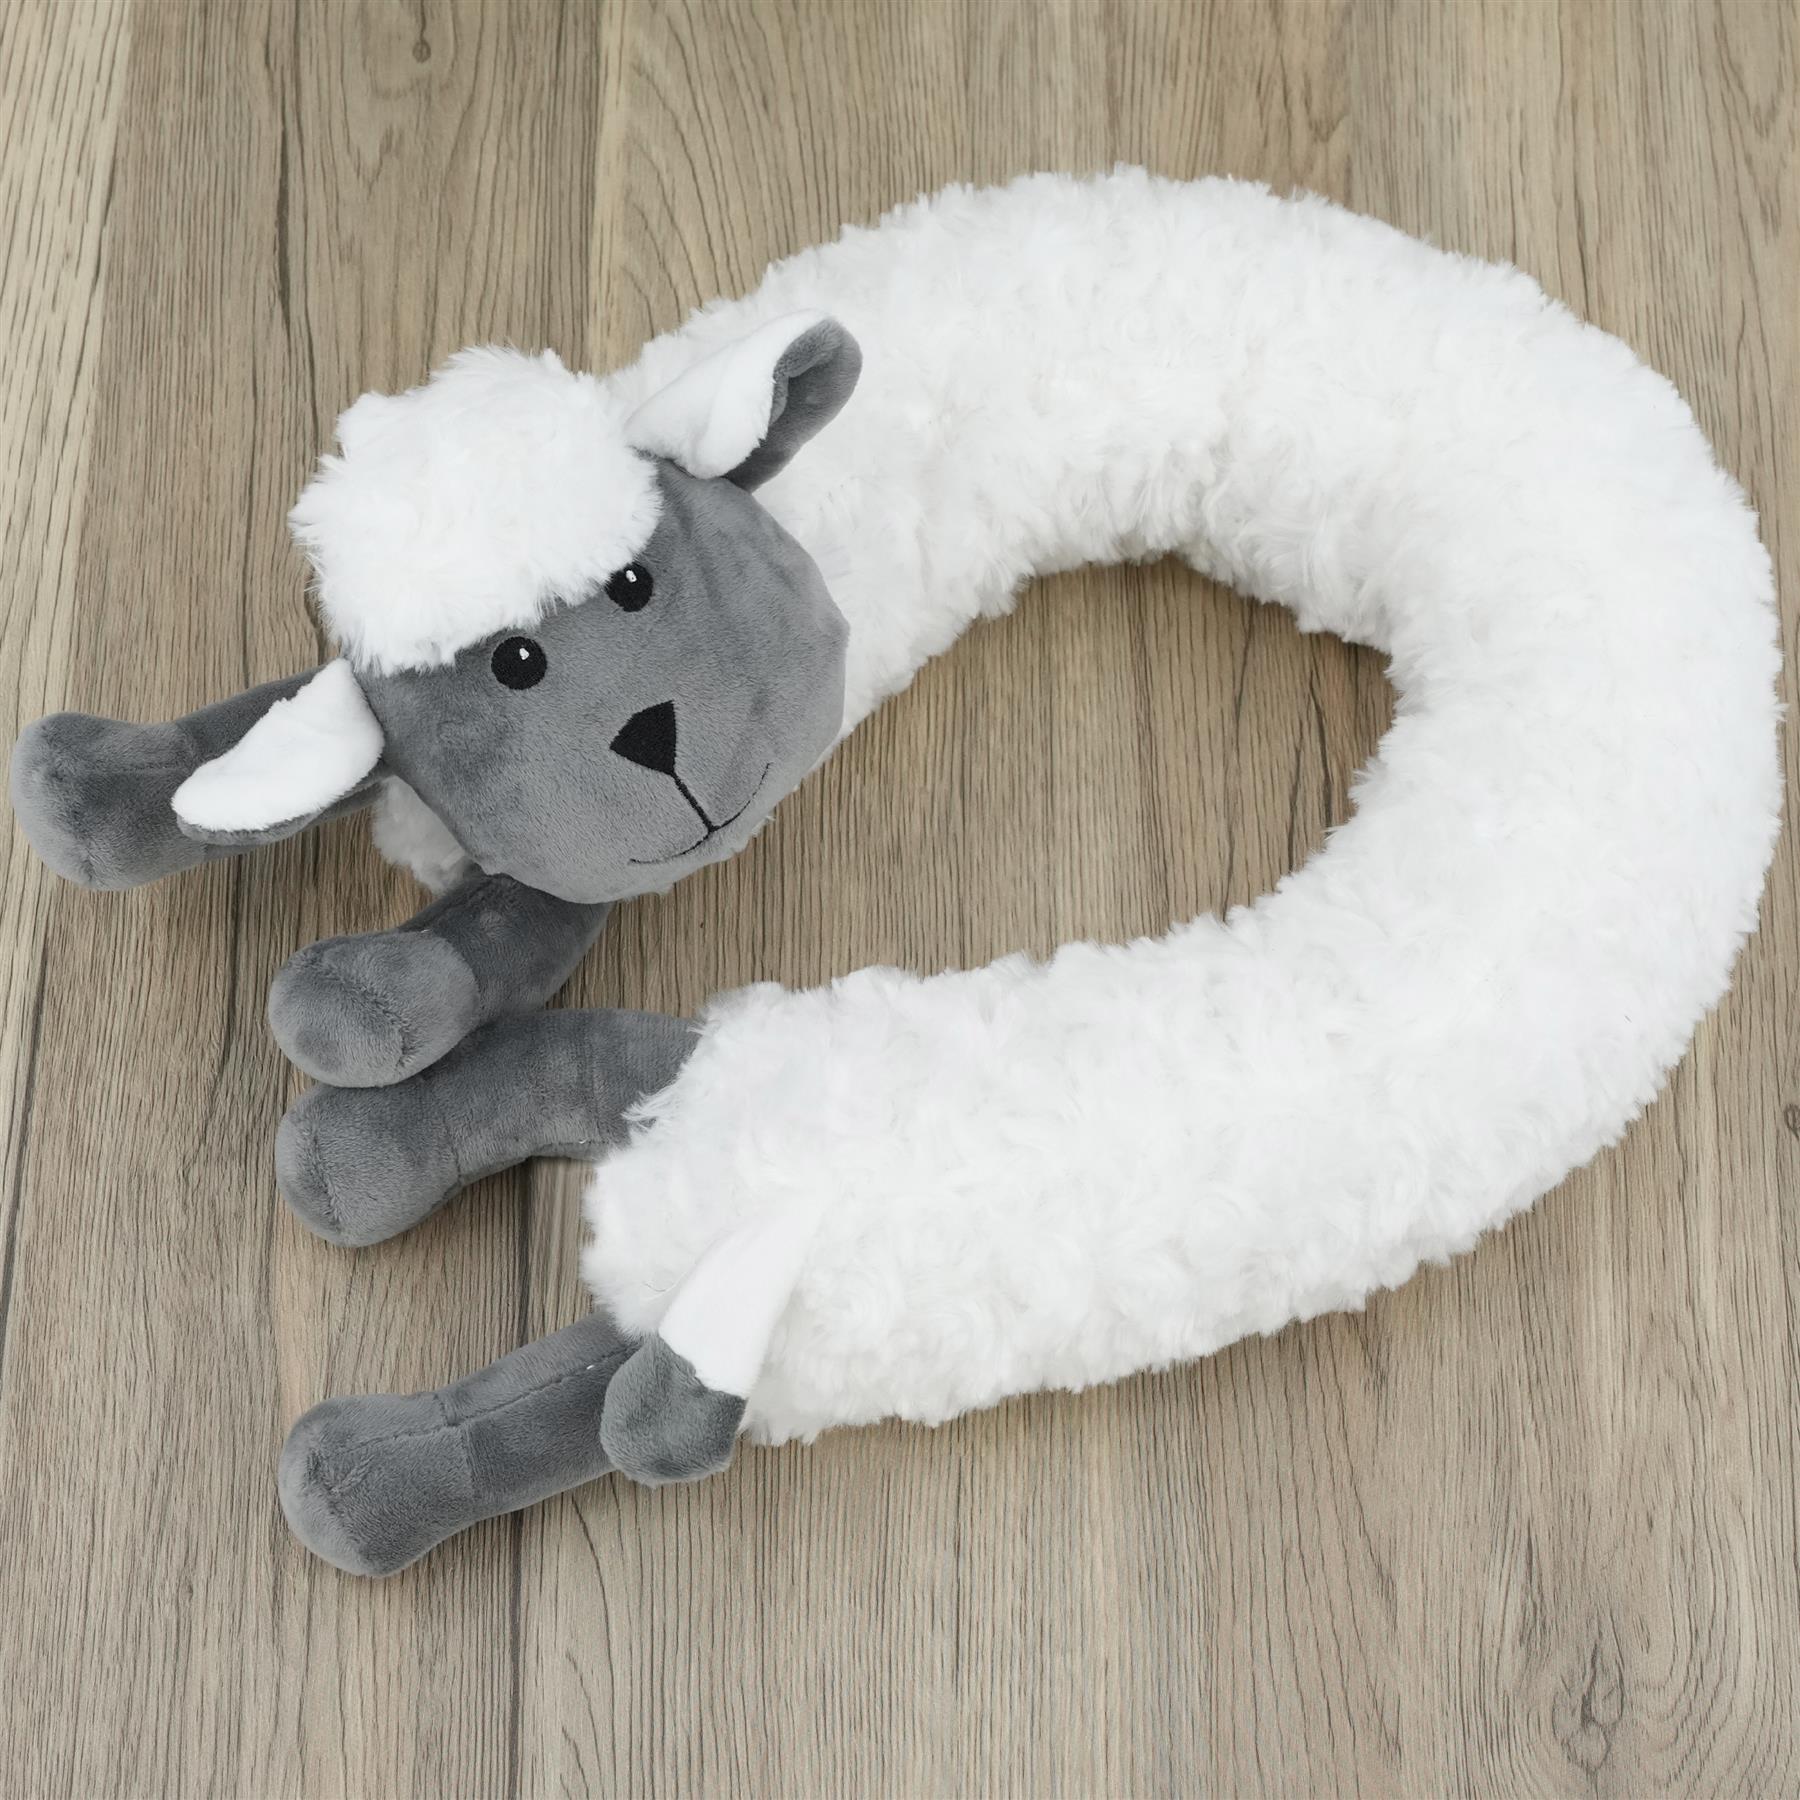 Novelty White Sheep Excluder by The Magic Toy Shop - The Magic Toy Shop